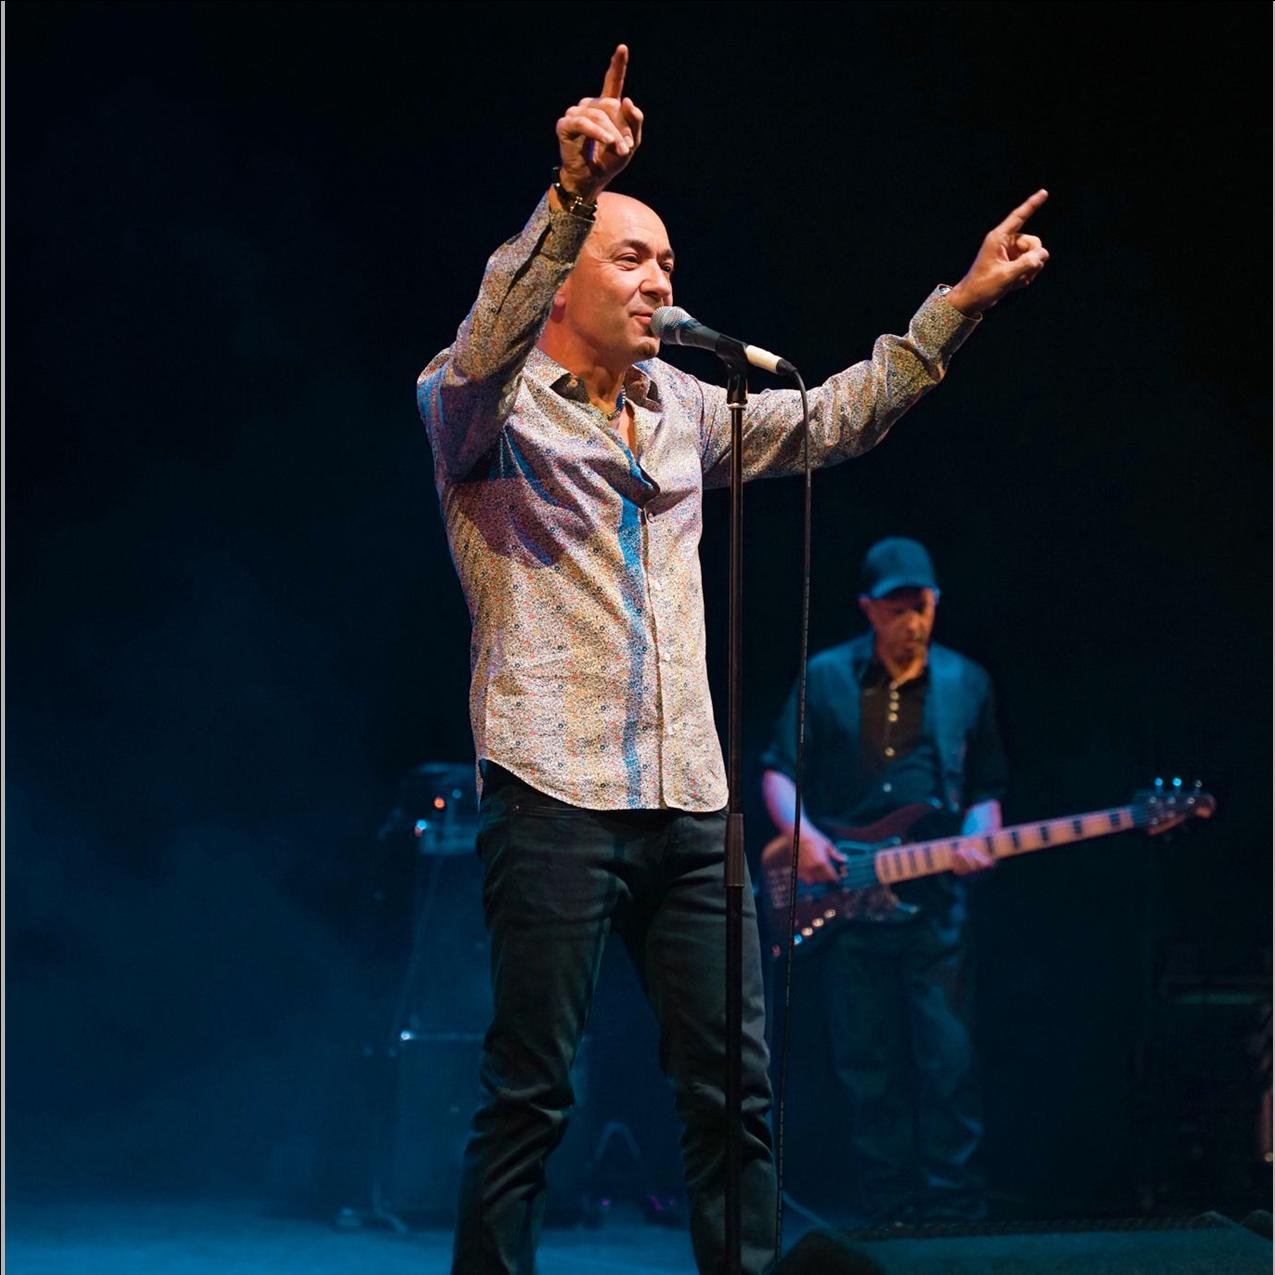 Image name Kenny Thomas Him Tour at Grand Opera House York York the 4 image from the post Kenny Thomas - Him Tour at Grand Opera House, York, York in Yorkshire.com.